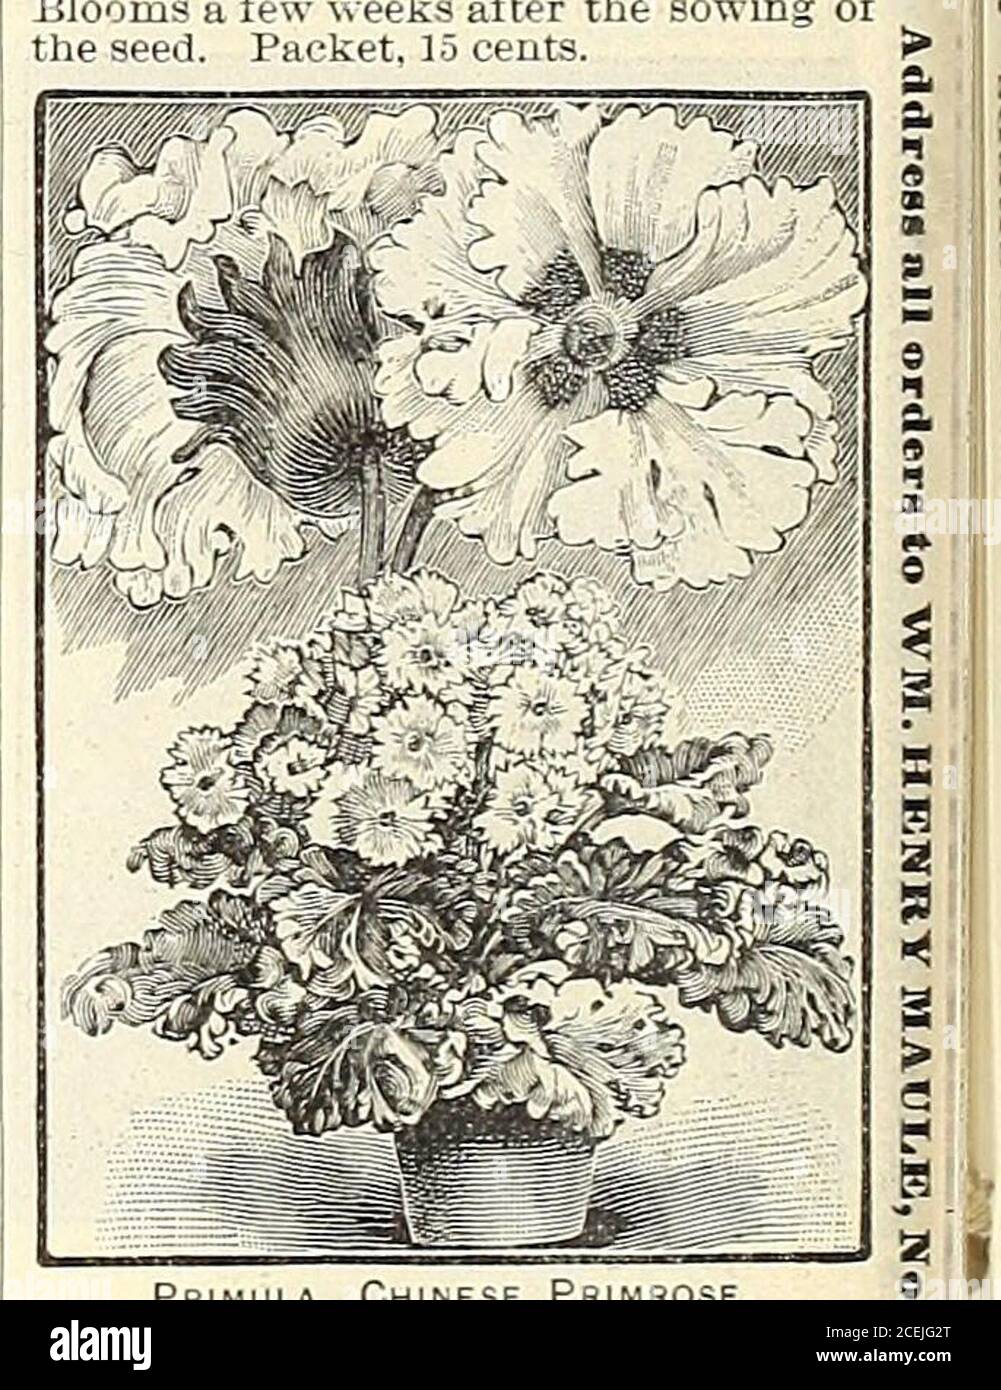 . The Maule seed book for 1905. reenhouse plants, doing well incool rooms. The.v are 8 or 10 incheshigh, and the flowers are variously cutand fringed. Separate colors, as follows: While. Pure white. Packet, 25 cts. Rose. A delicate shade. Pkt., 25c. Crimson. A rich color. Pkt., 25c. Blue. A violet blue. Pkt., 35 cts. Finest Mixed. All shades andcolors. Flowers, self colored, zoned,eyed and striped. Packet, 20 cents. Cowslip. Irimula veris. A prett.v,spring-flowering perennial. Colors in-clude shades of yeUow, urown, etc. FineMixed. Packet. 5 cents. English Primrose. Primula vul-garis. The wild Stock Photo